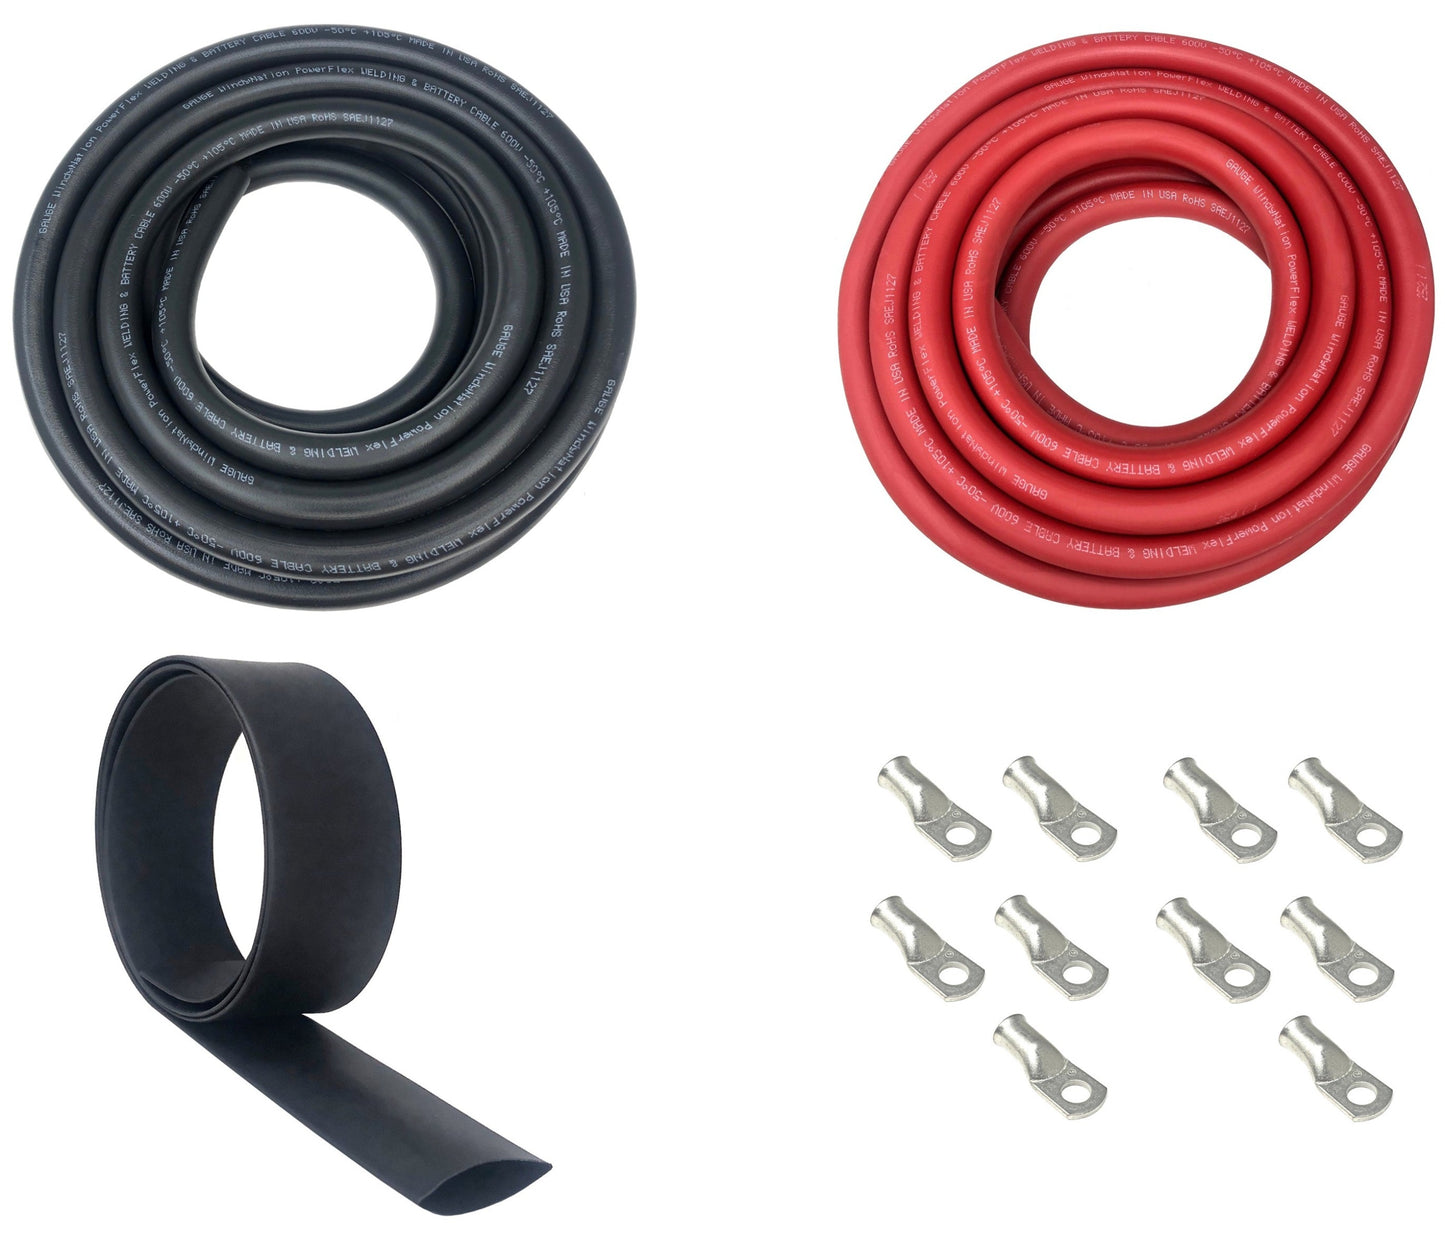 2/0 Gauge Welding Battery Cable Kit - Includes 5 pieces of 3/8" + 5 pieces of 5/16" Tinned Copper Cable Lugs and 3 feet Black Heat Shrink Tubing